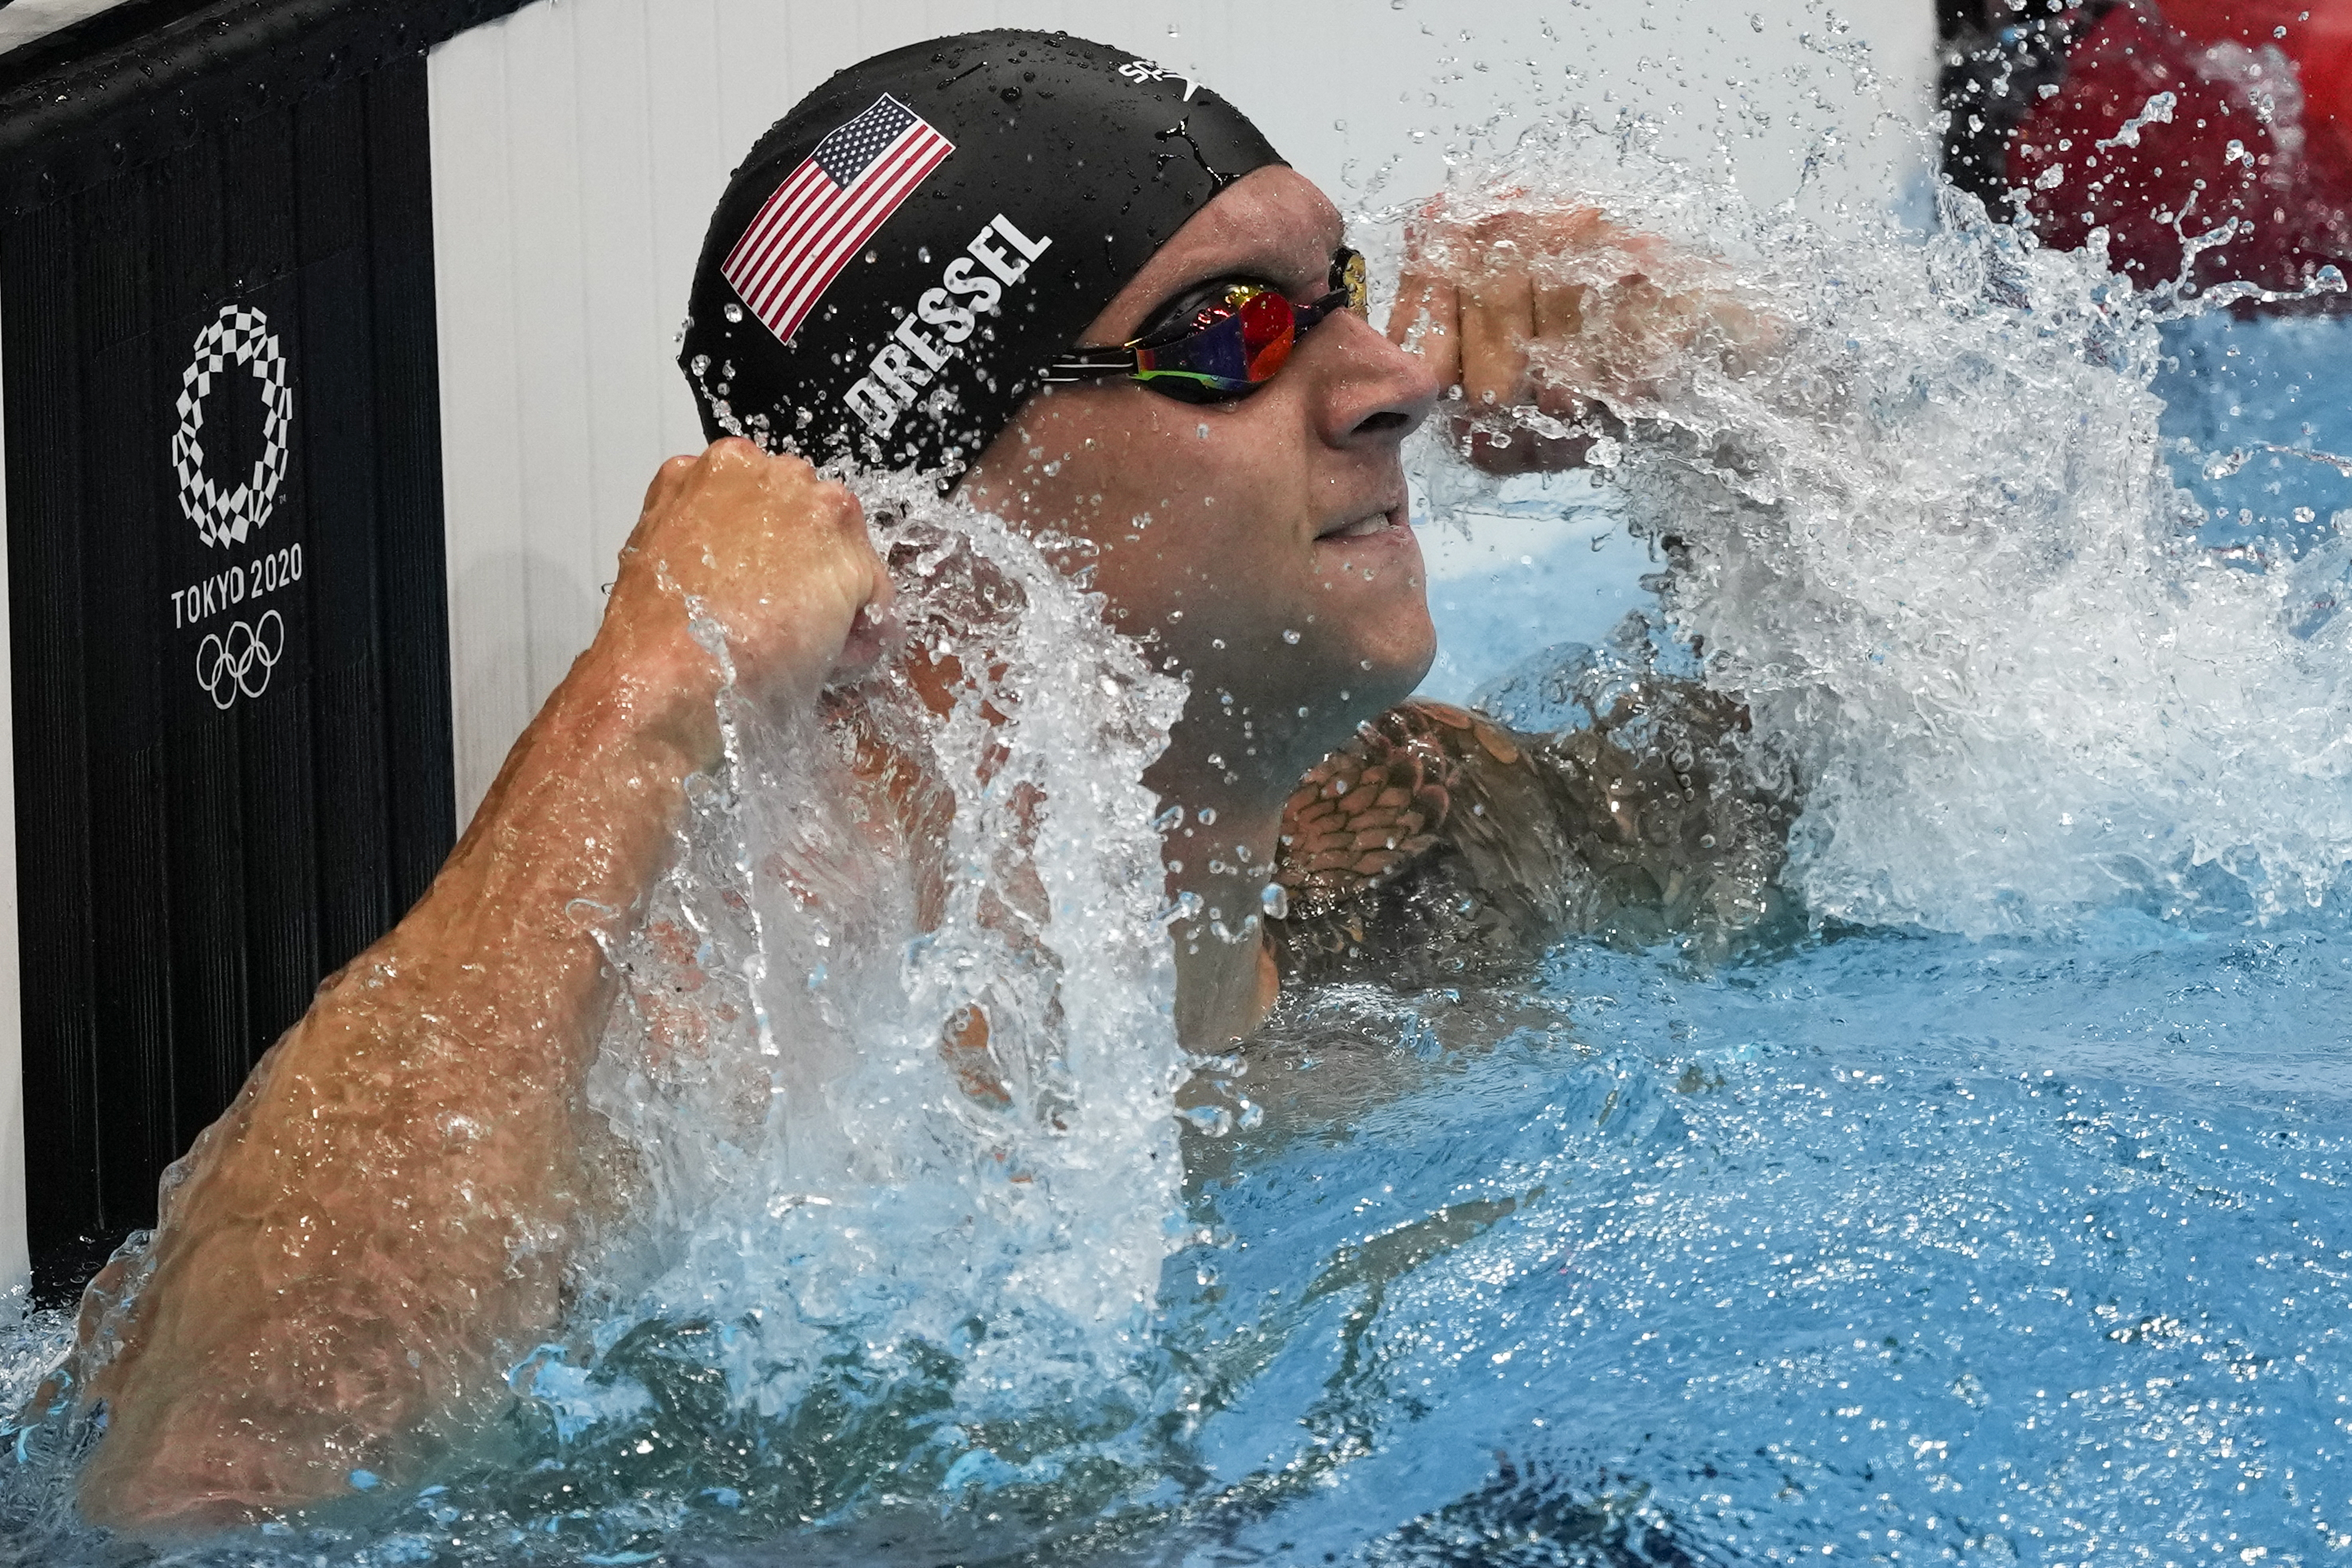 Dressel Joins Exclusive Club With 5 Golds at Tokyo Olympics